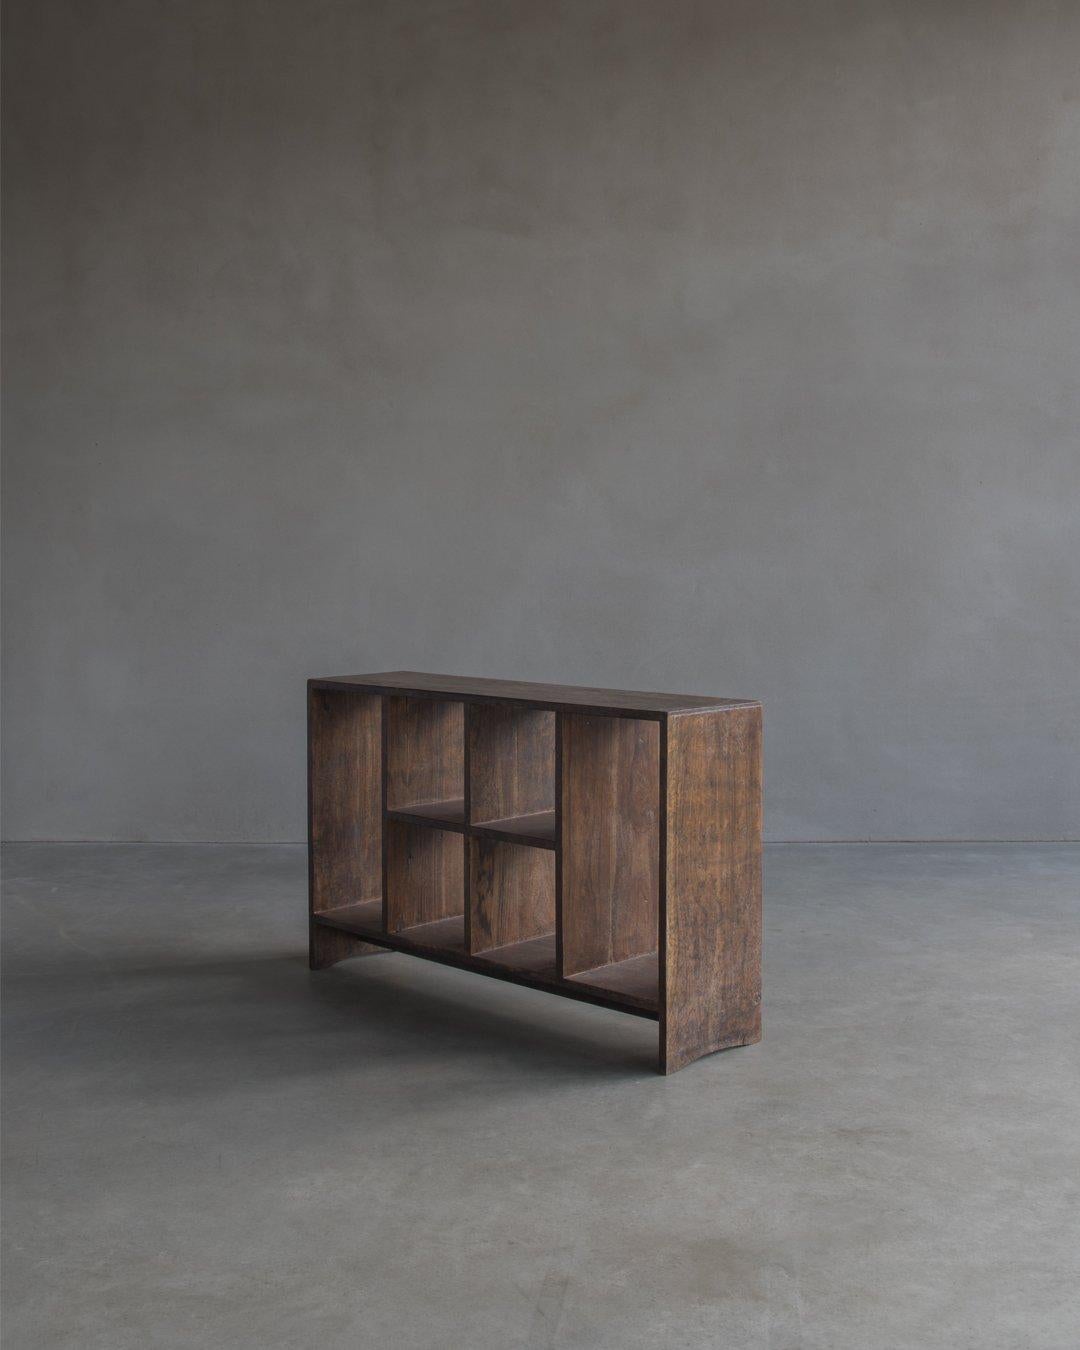 Authentic PJ-R-27-A by Pierre Jeanneret - This double-sided low cupboard, known as “6-hole rack” or 